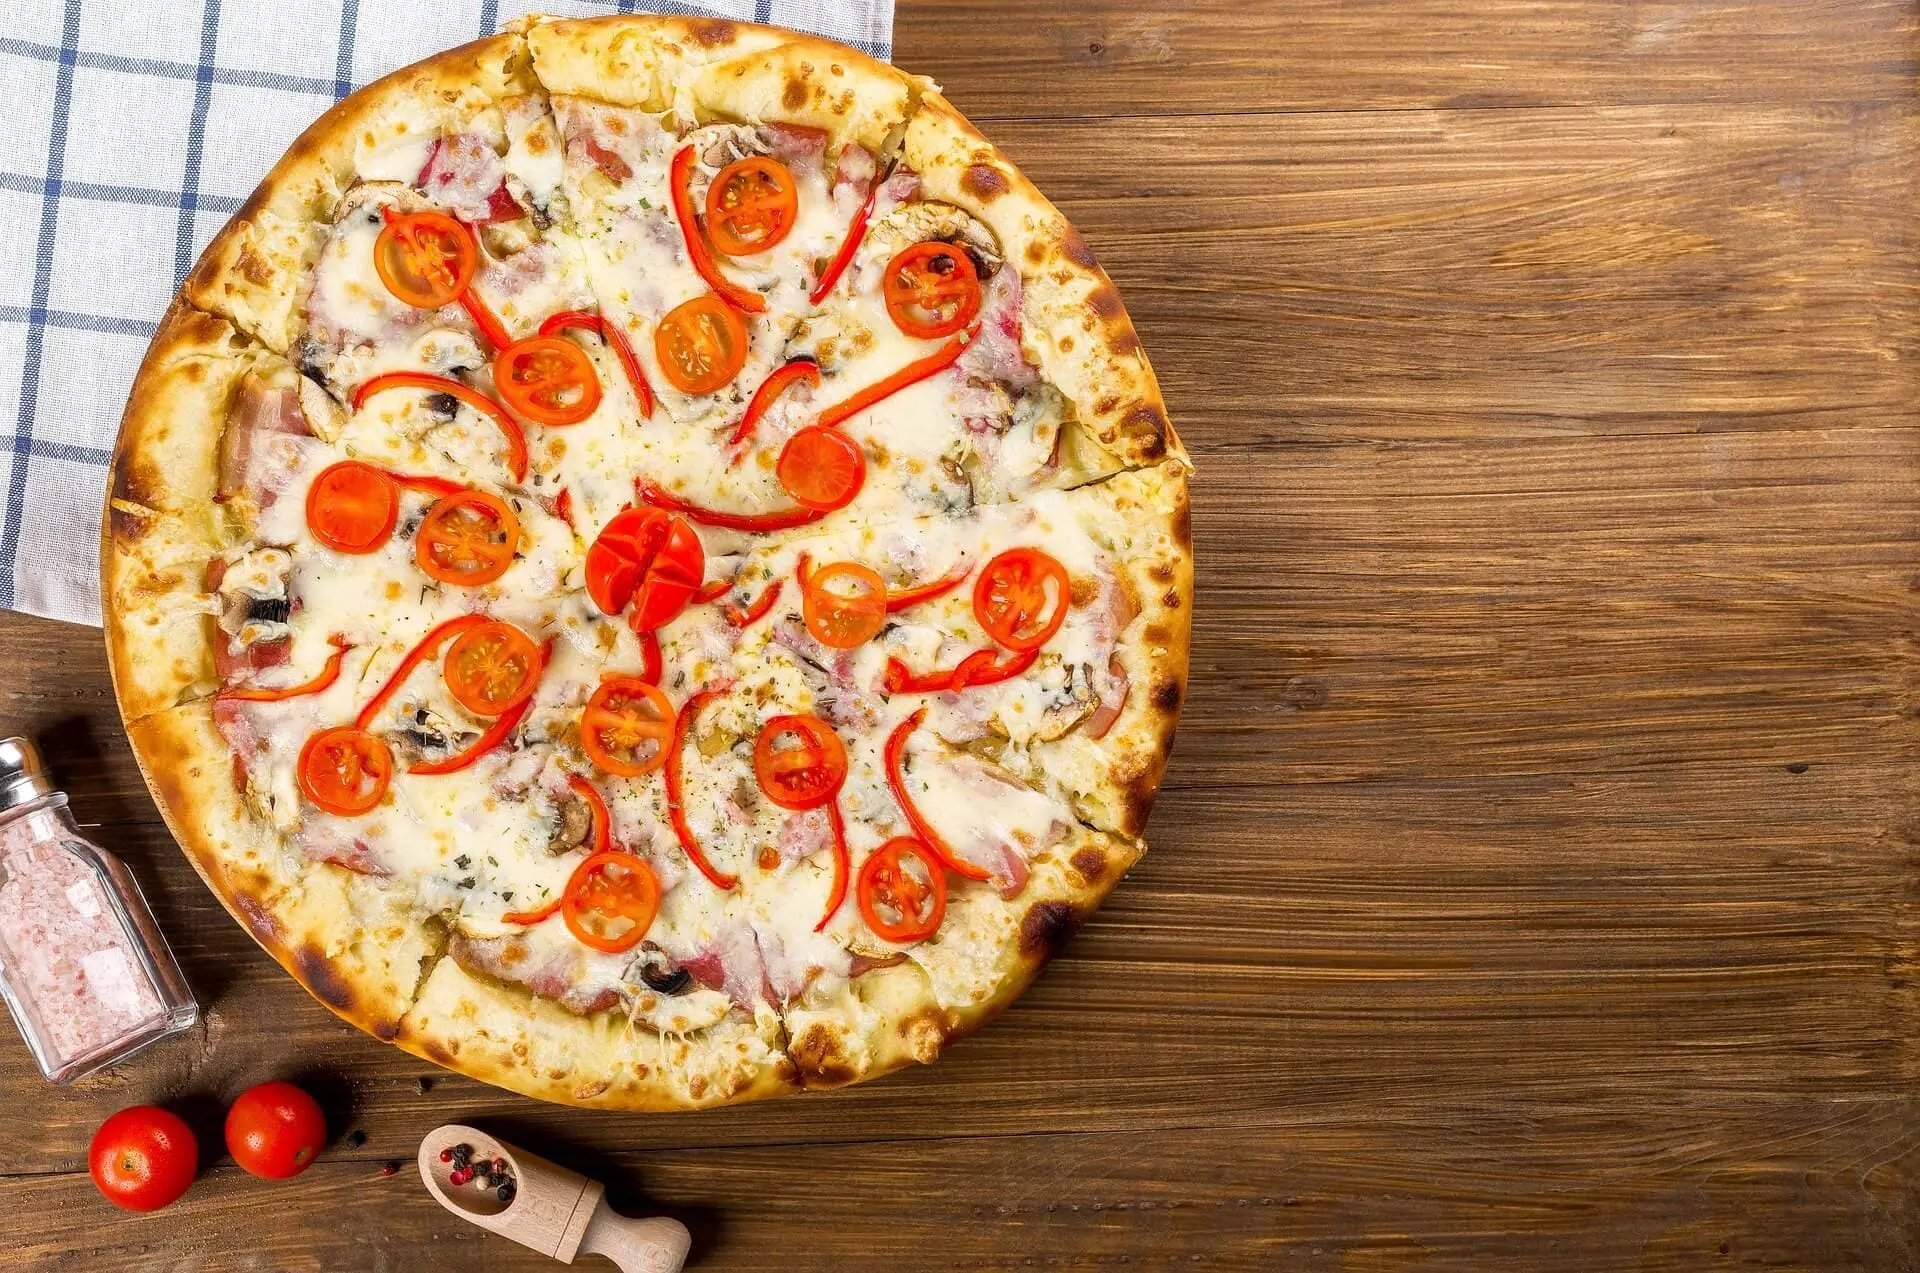 10 Inch Pizza Calories: Understanding the Nutritional Facts